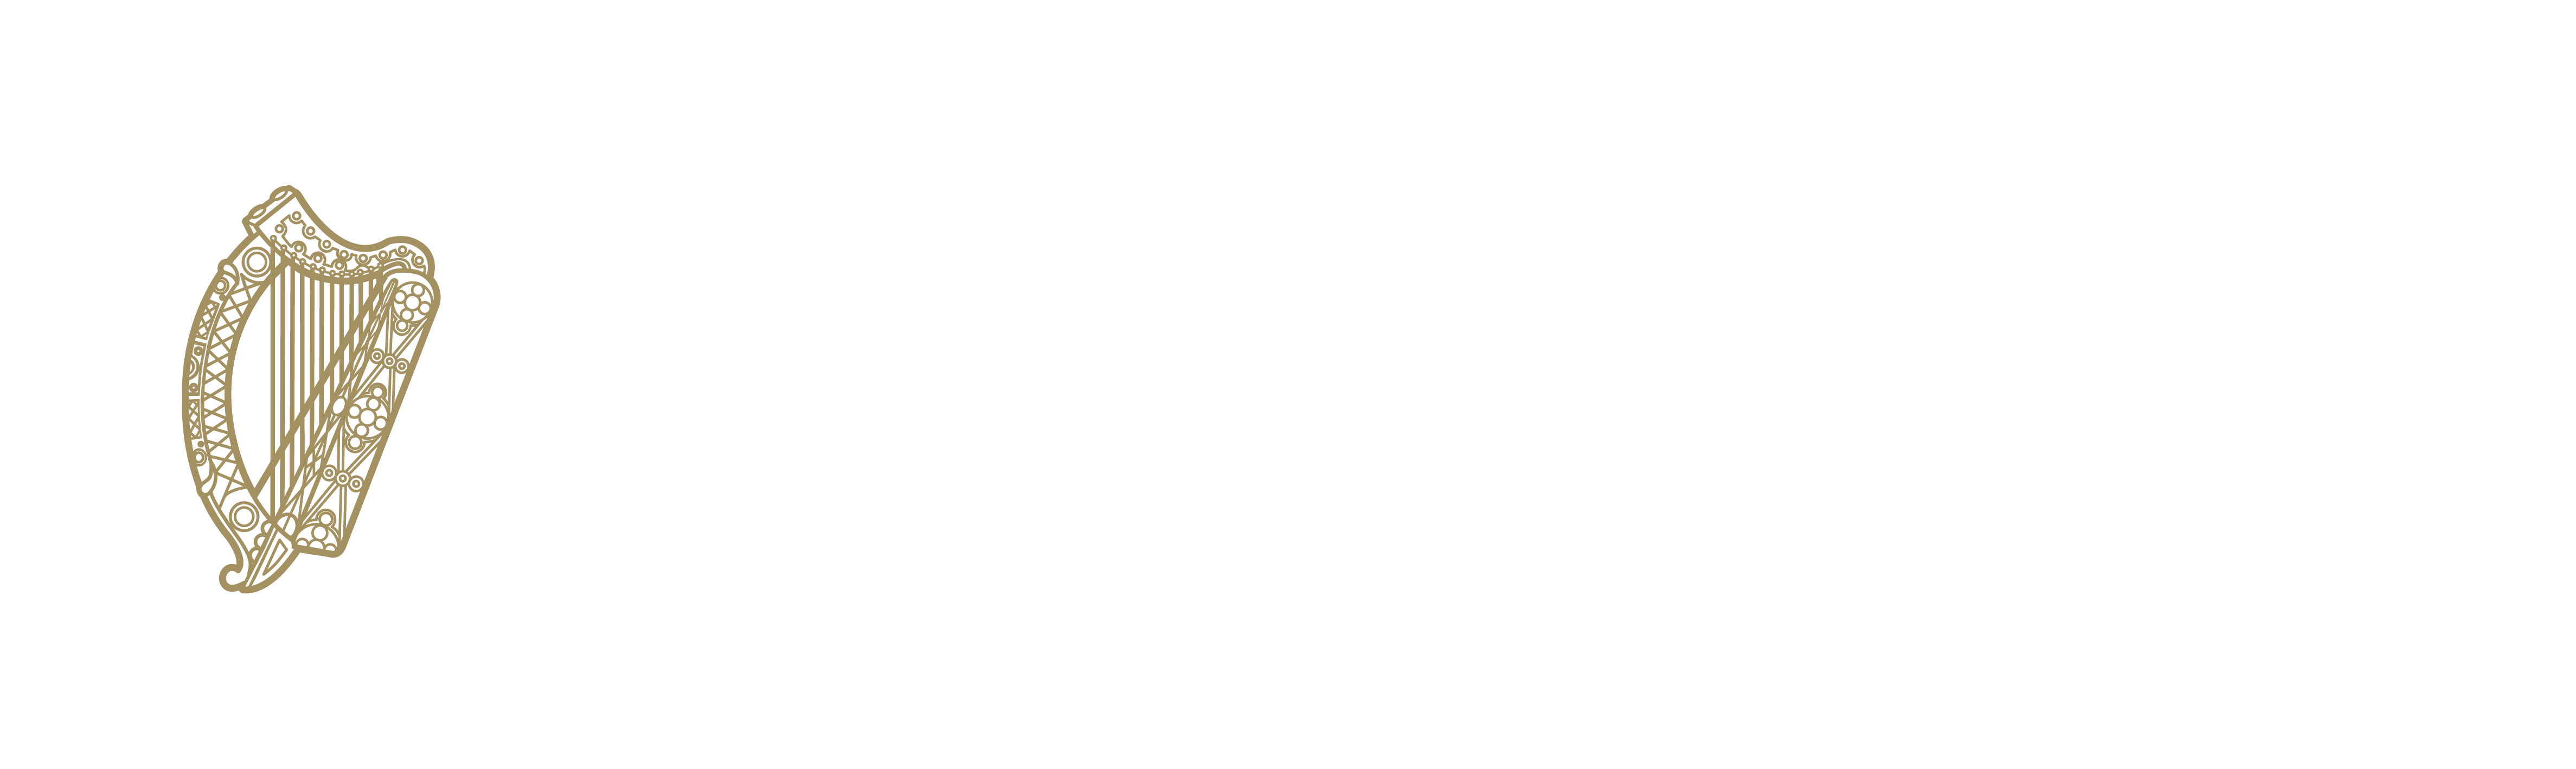 Department of Culture Heritage and the Gaeltacht